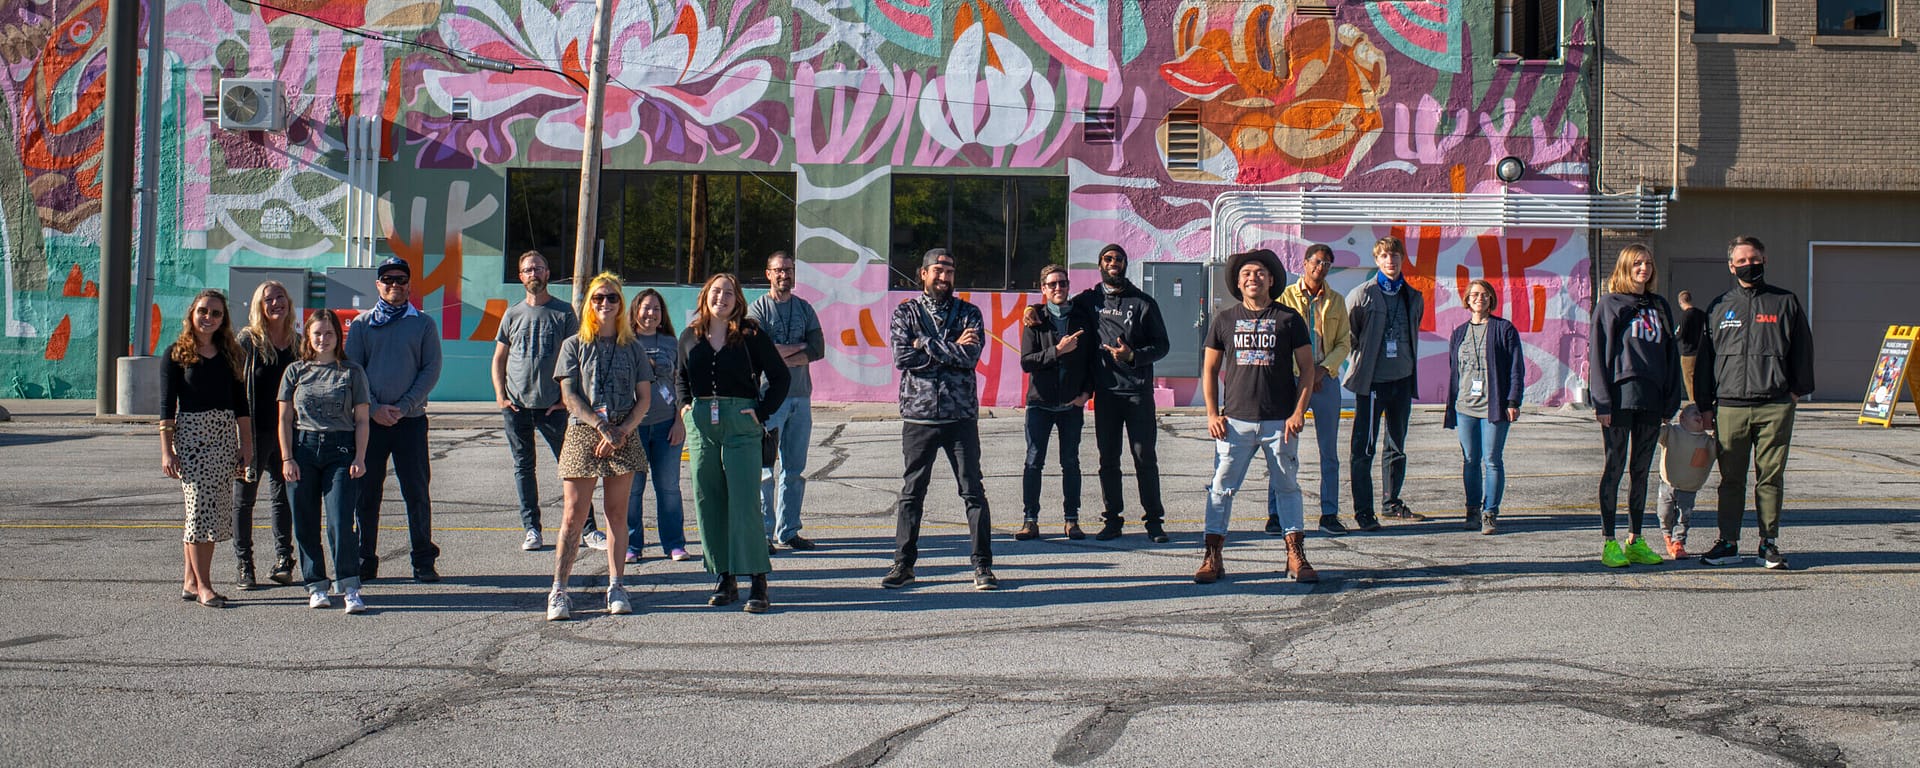 A photo of the Mural Fest artists in front of a mural.